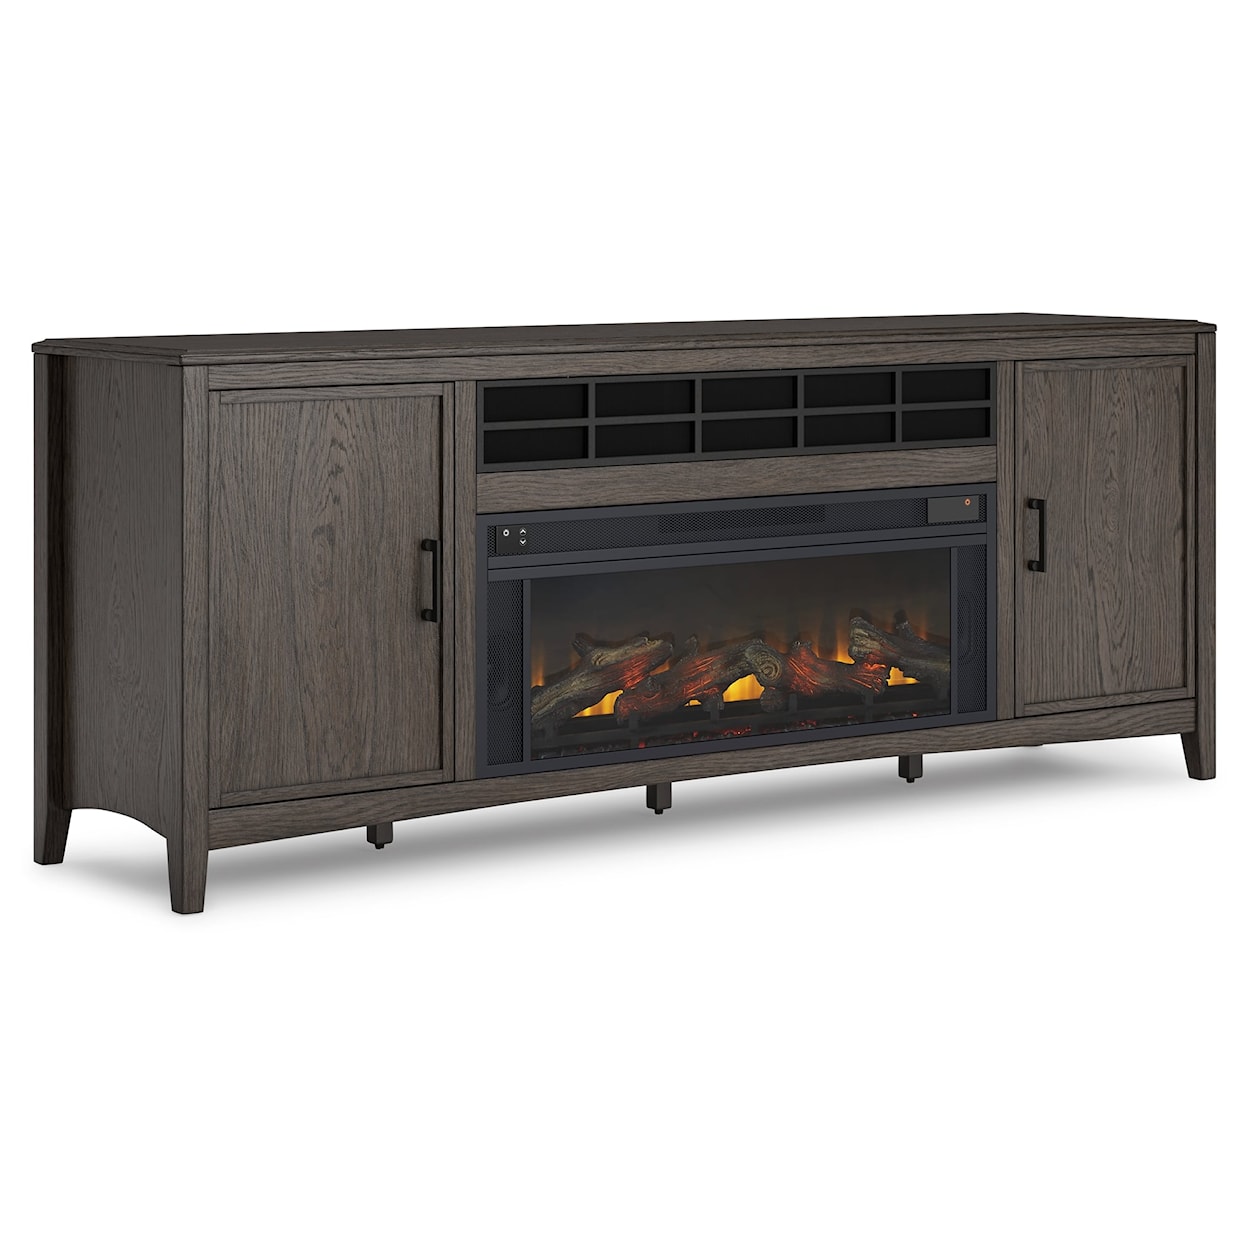 Signature Design by Ashley Montillan 84" TV Stand with Electric Fireplace